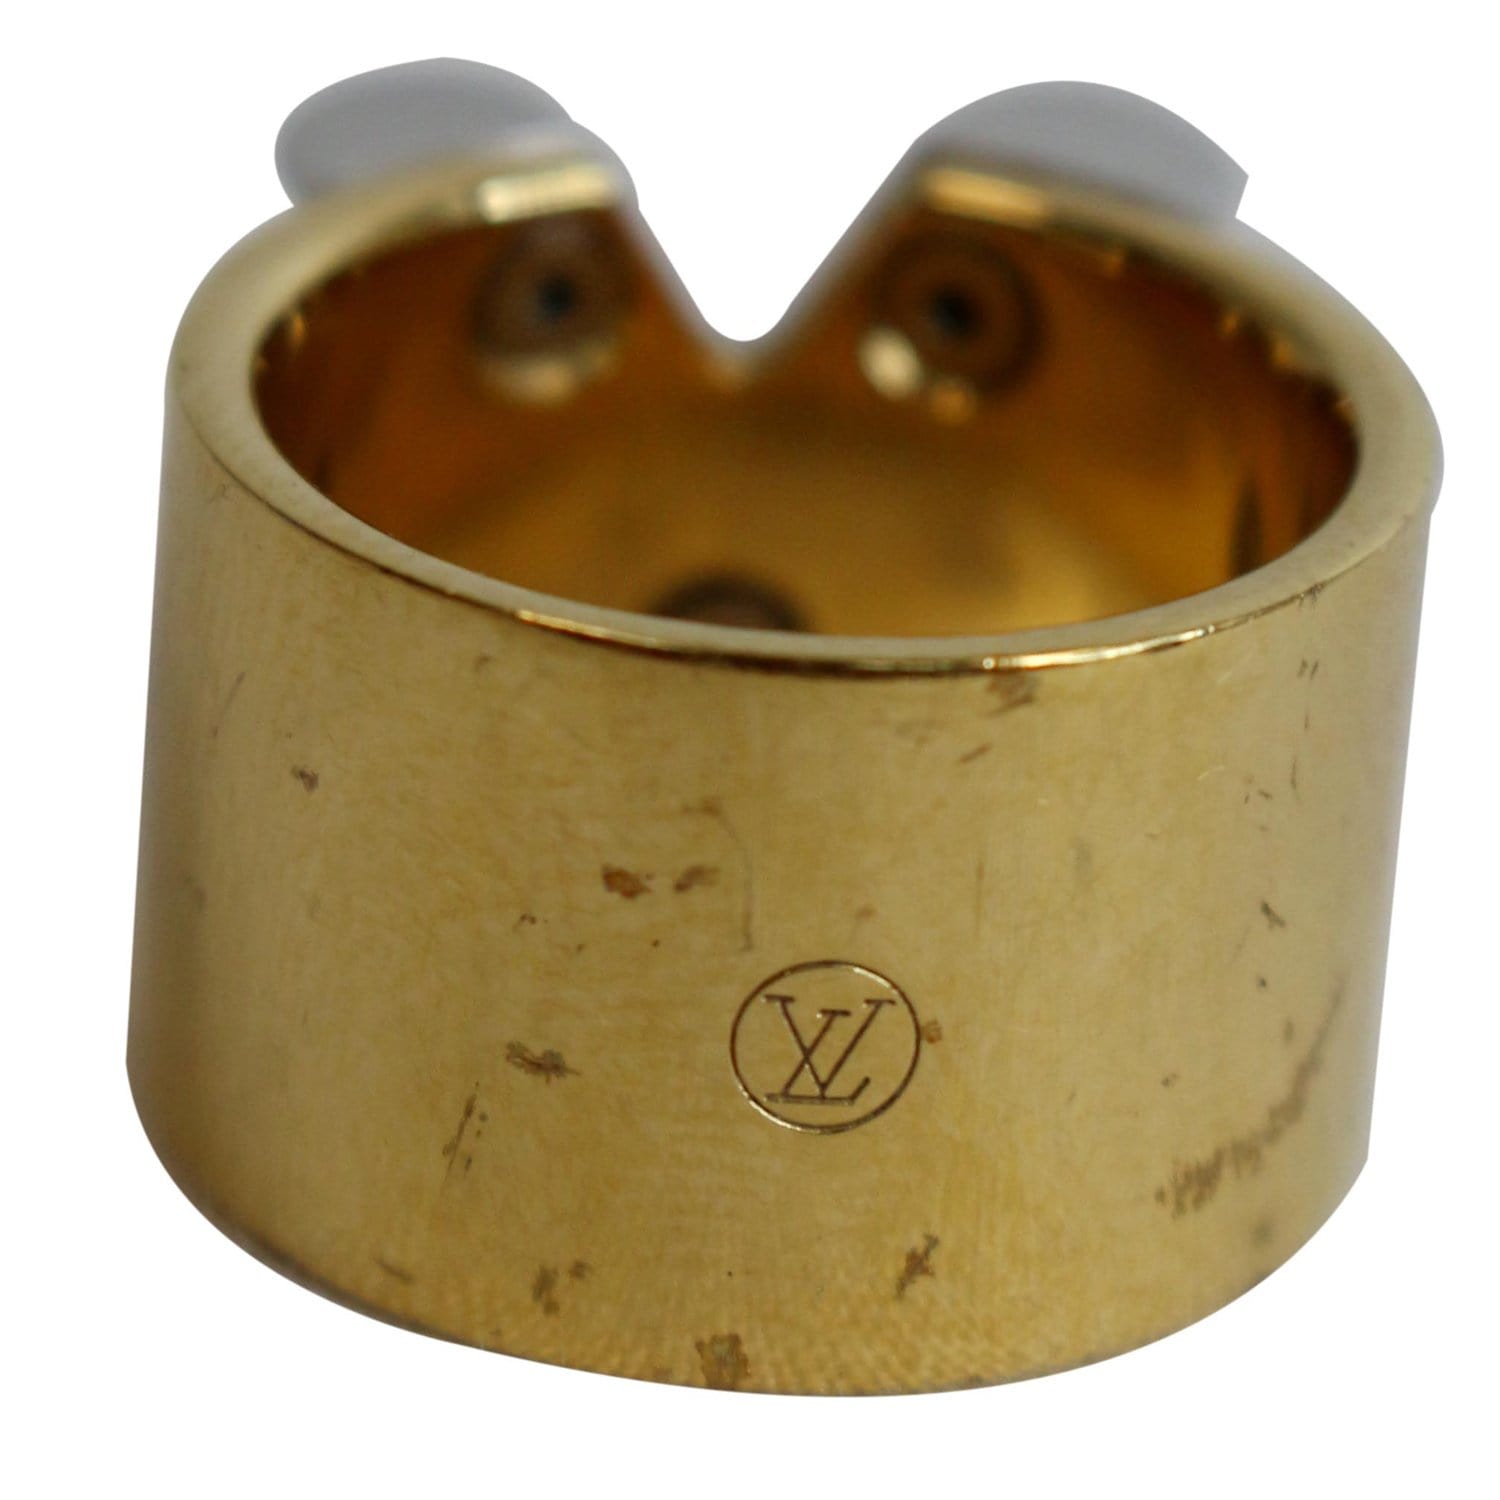 Authentic Louis Vuitton Gold D Ring 5/8” With Leather For Bag Strap  Replacement